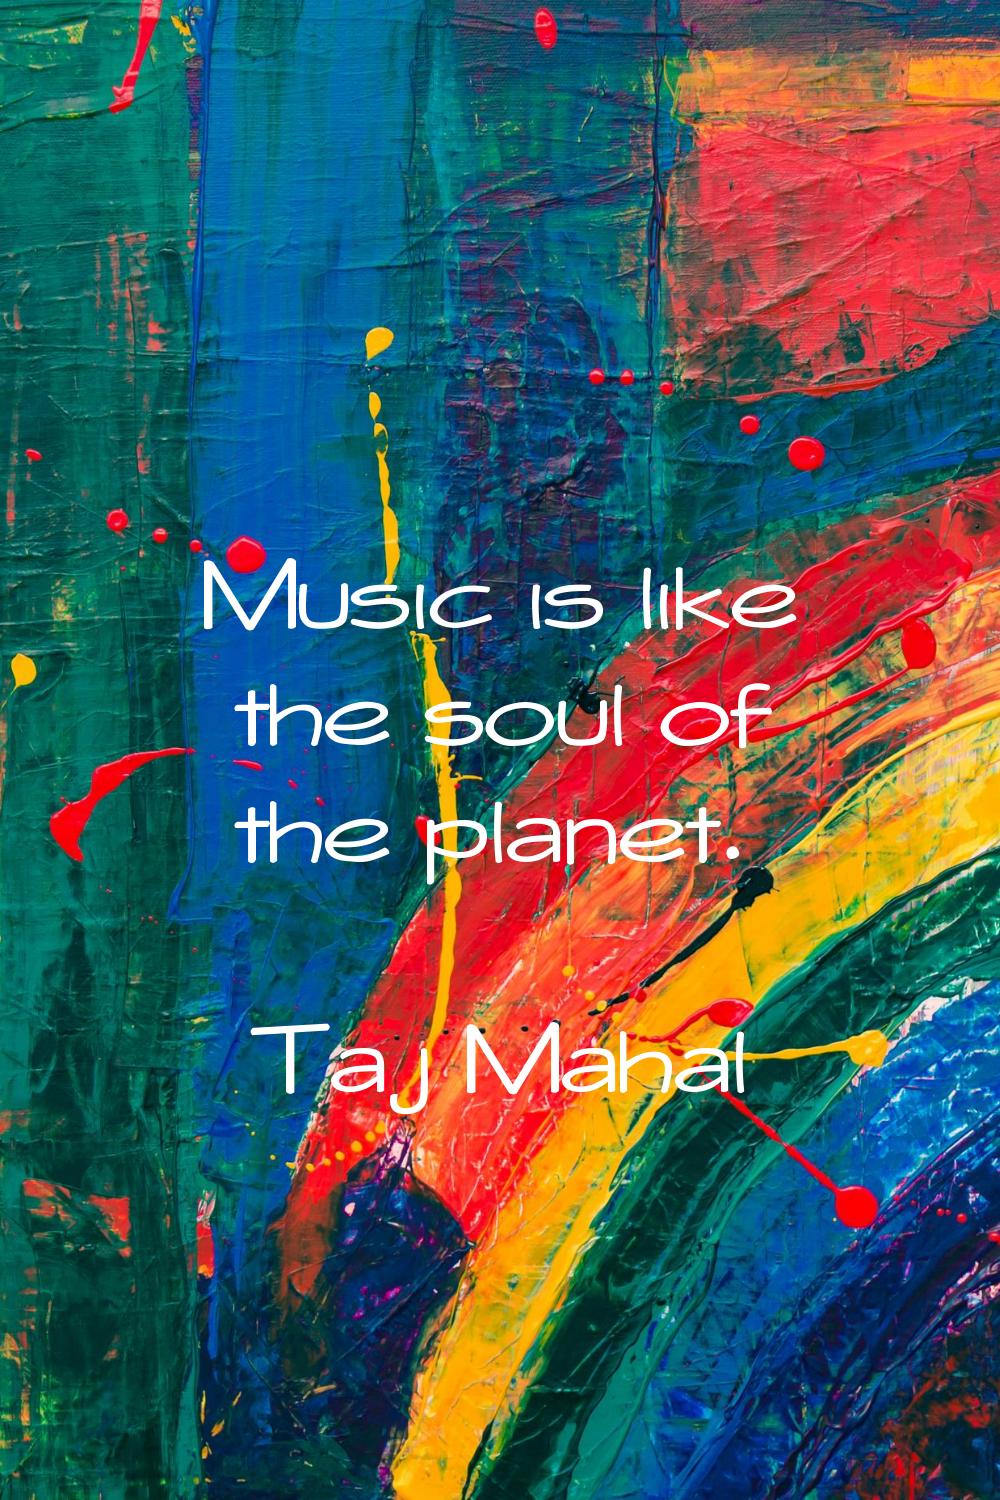 Music is like the soul of the planet.